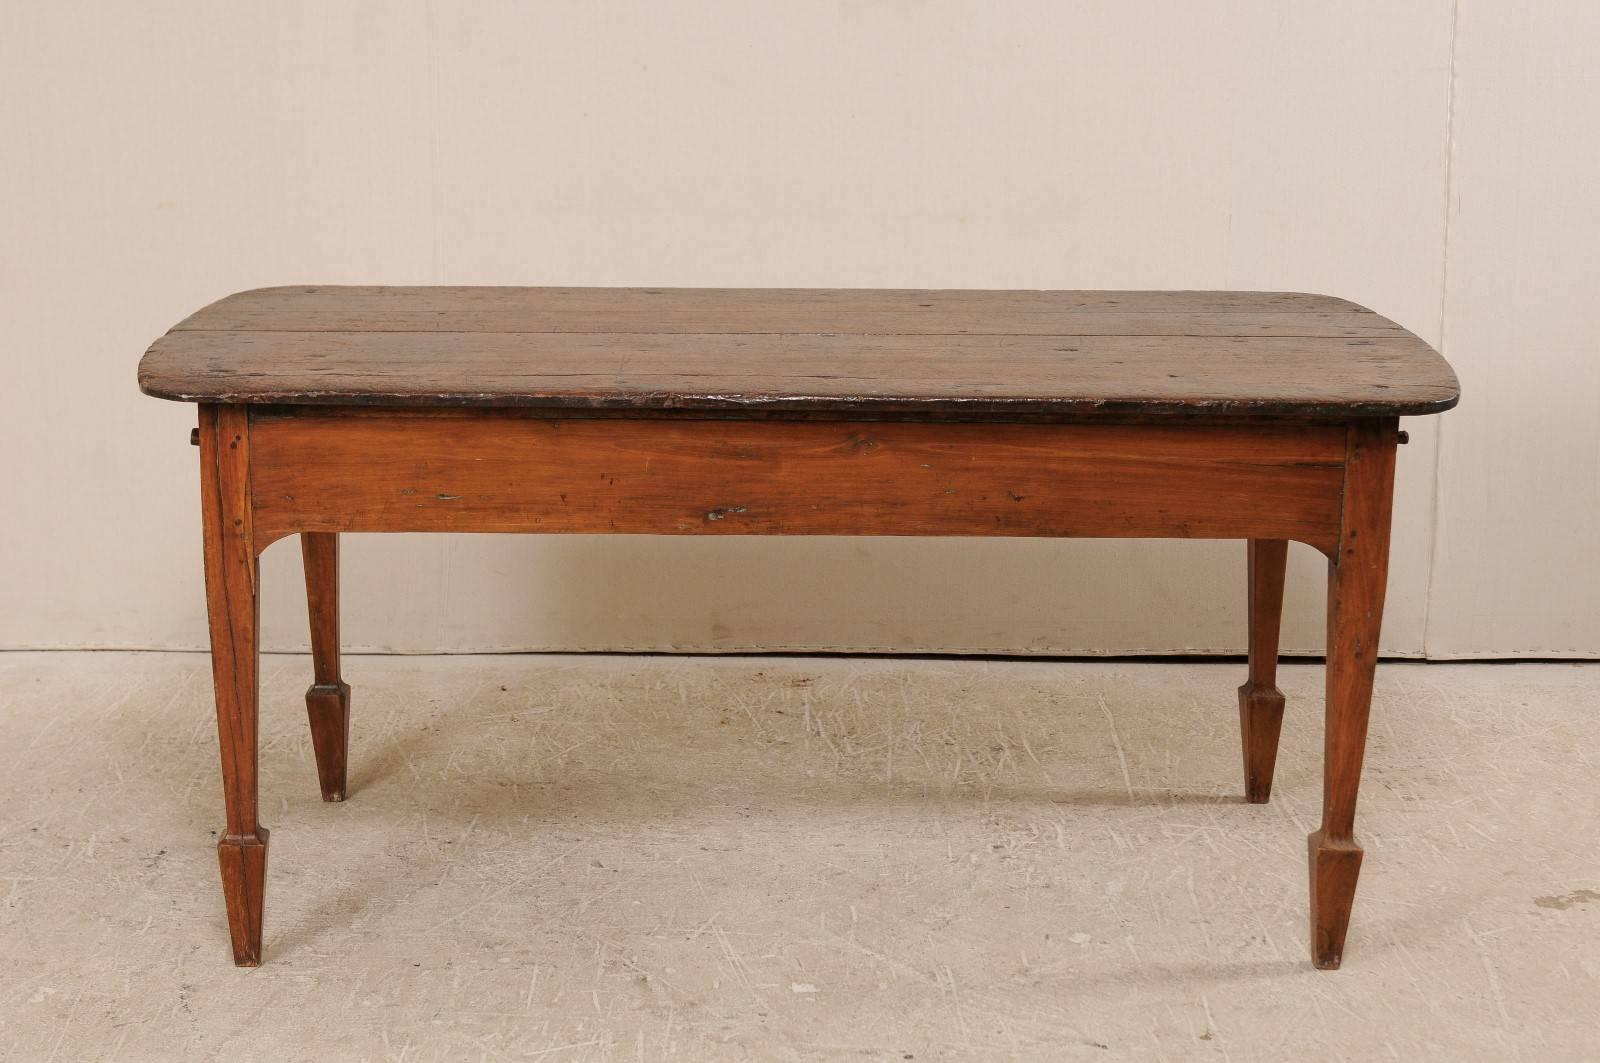 Rustic Early 20th Century Brazilian Peroba Wood Table with Two Drawers and Spaded Feet